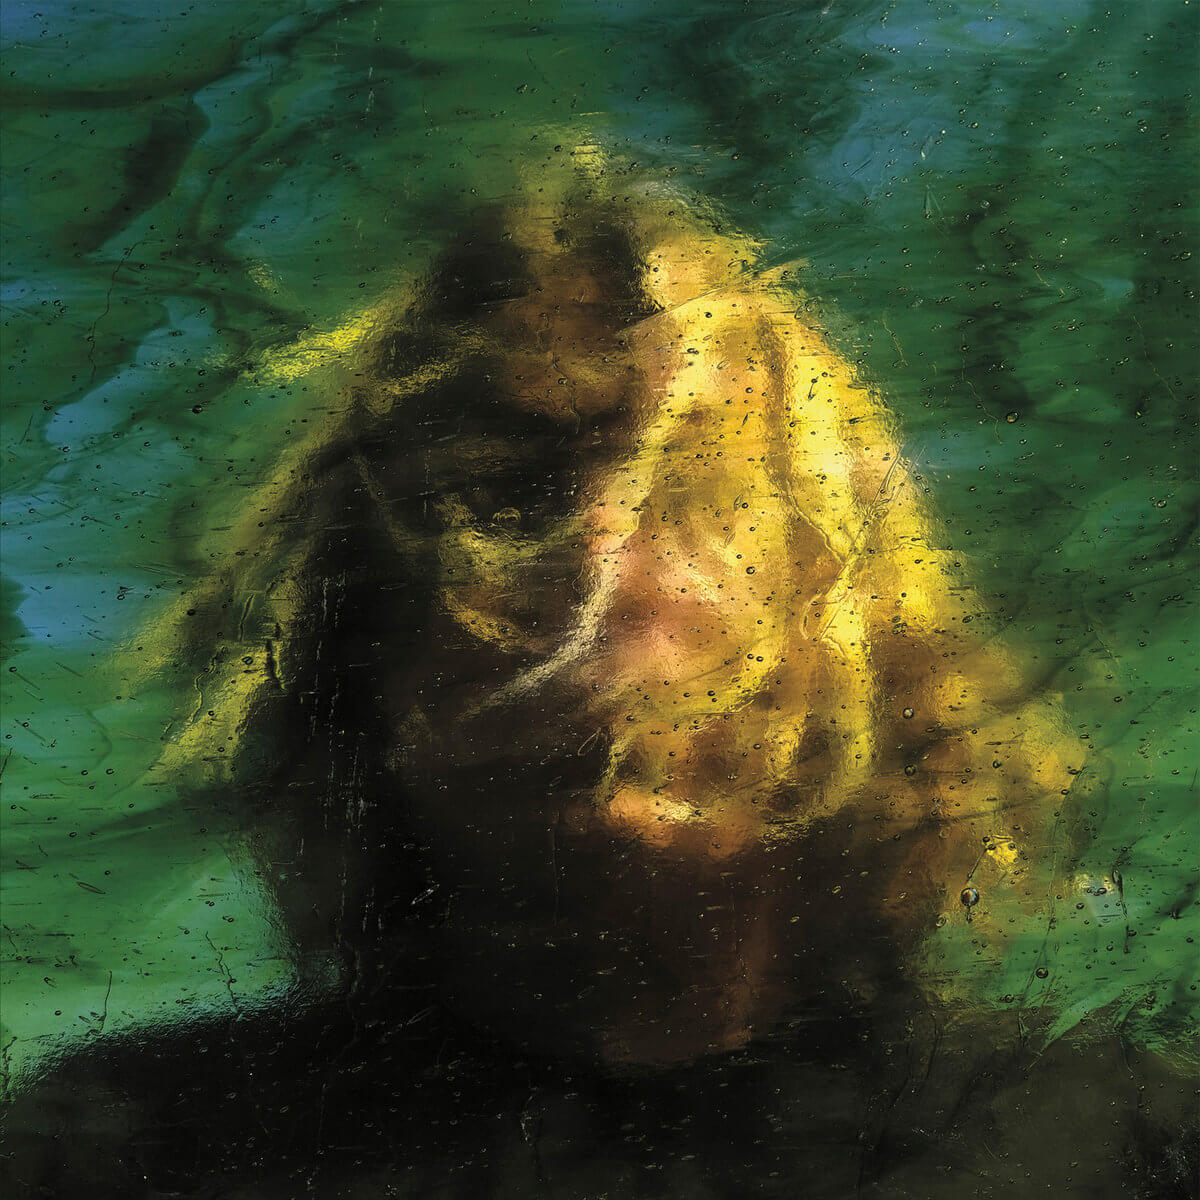 Three Bells by Ty Segall album review by Ben Lock for Northern Transmissions